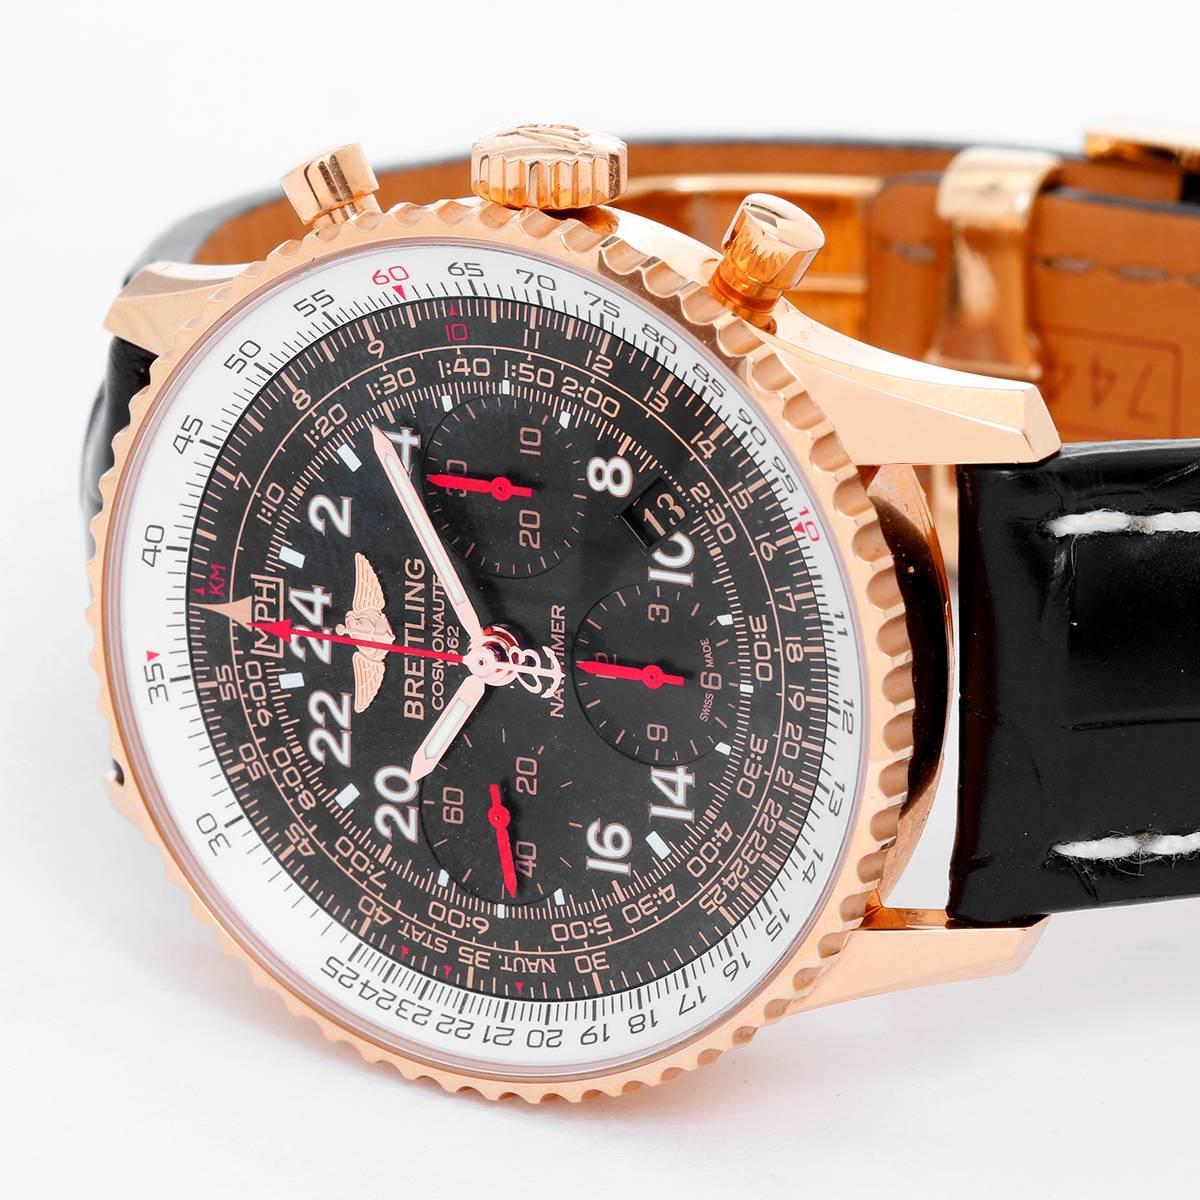 Breitling Navitimer Cosmonaute Rose Gold RB0210 -  Manual. 18K Rose Gold ( 43 mm ). Black dial with Arabic numerals; sub dials with red hands. Black Breitling alligator strap. Pre-owned with  Breitling box and papers. Limited edition 57 /250.